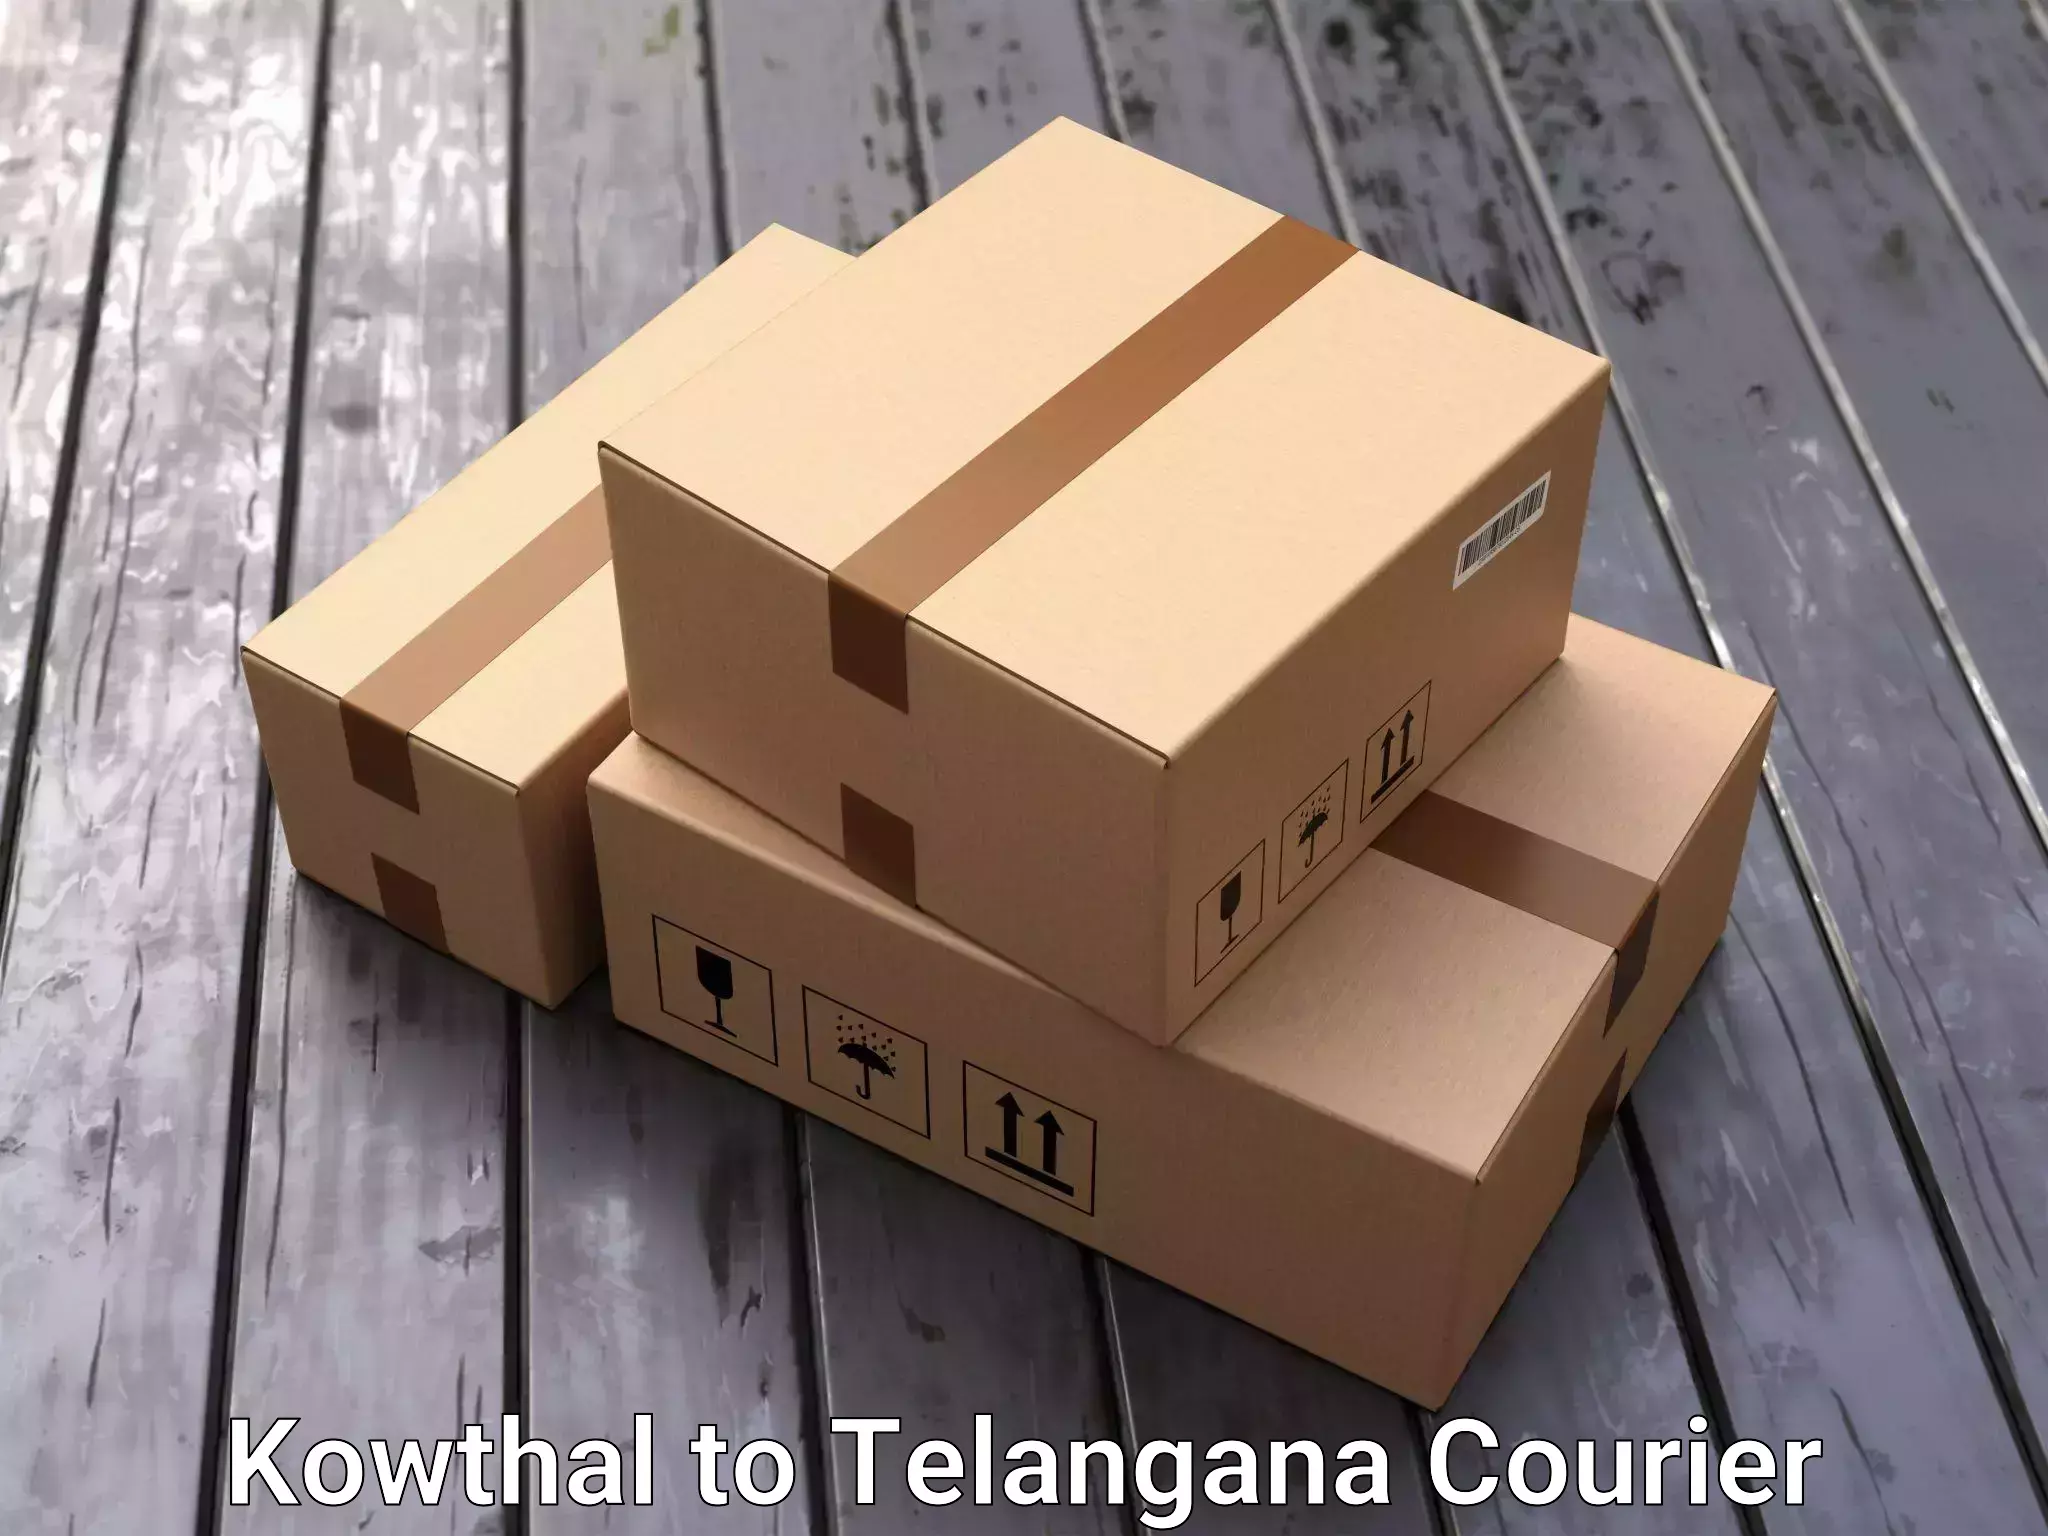 Trusted moving company Kowthal to Manneguda